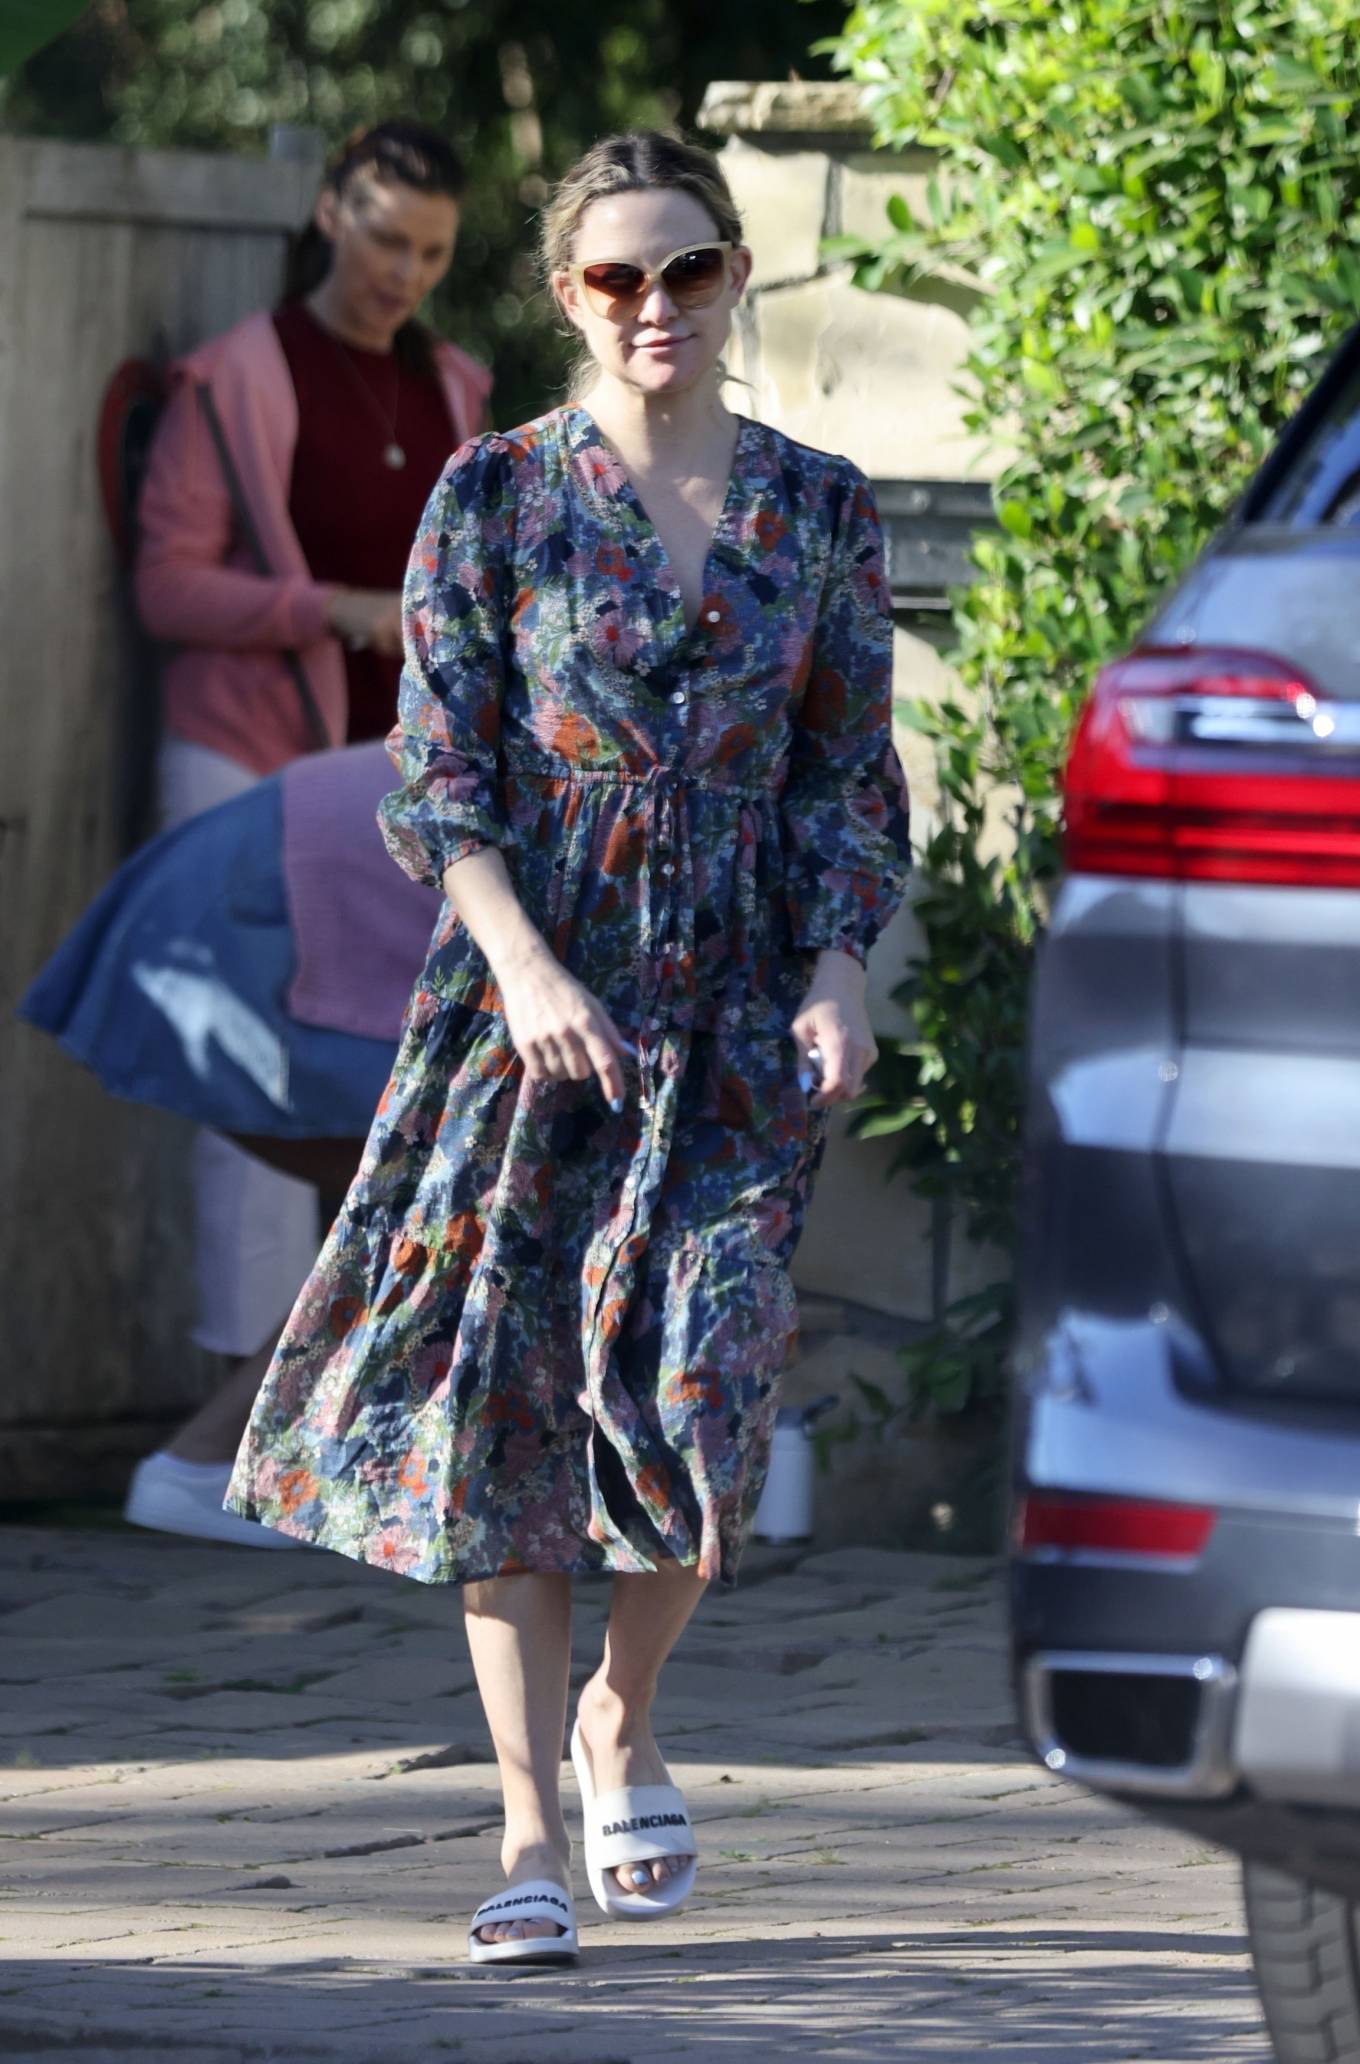 Kate Hudson 2022 : Kate Hudson – Wears a flower dress while out in Los Angeles-05